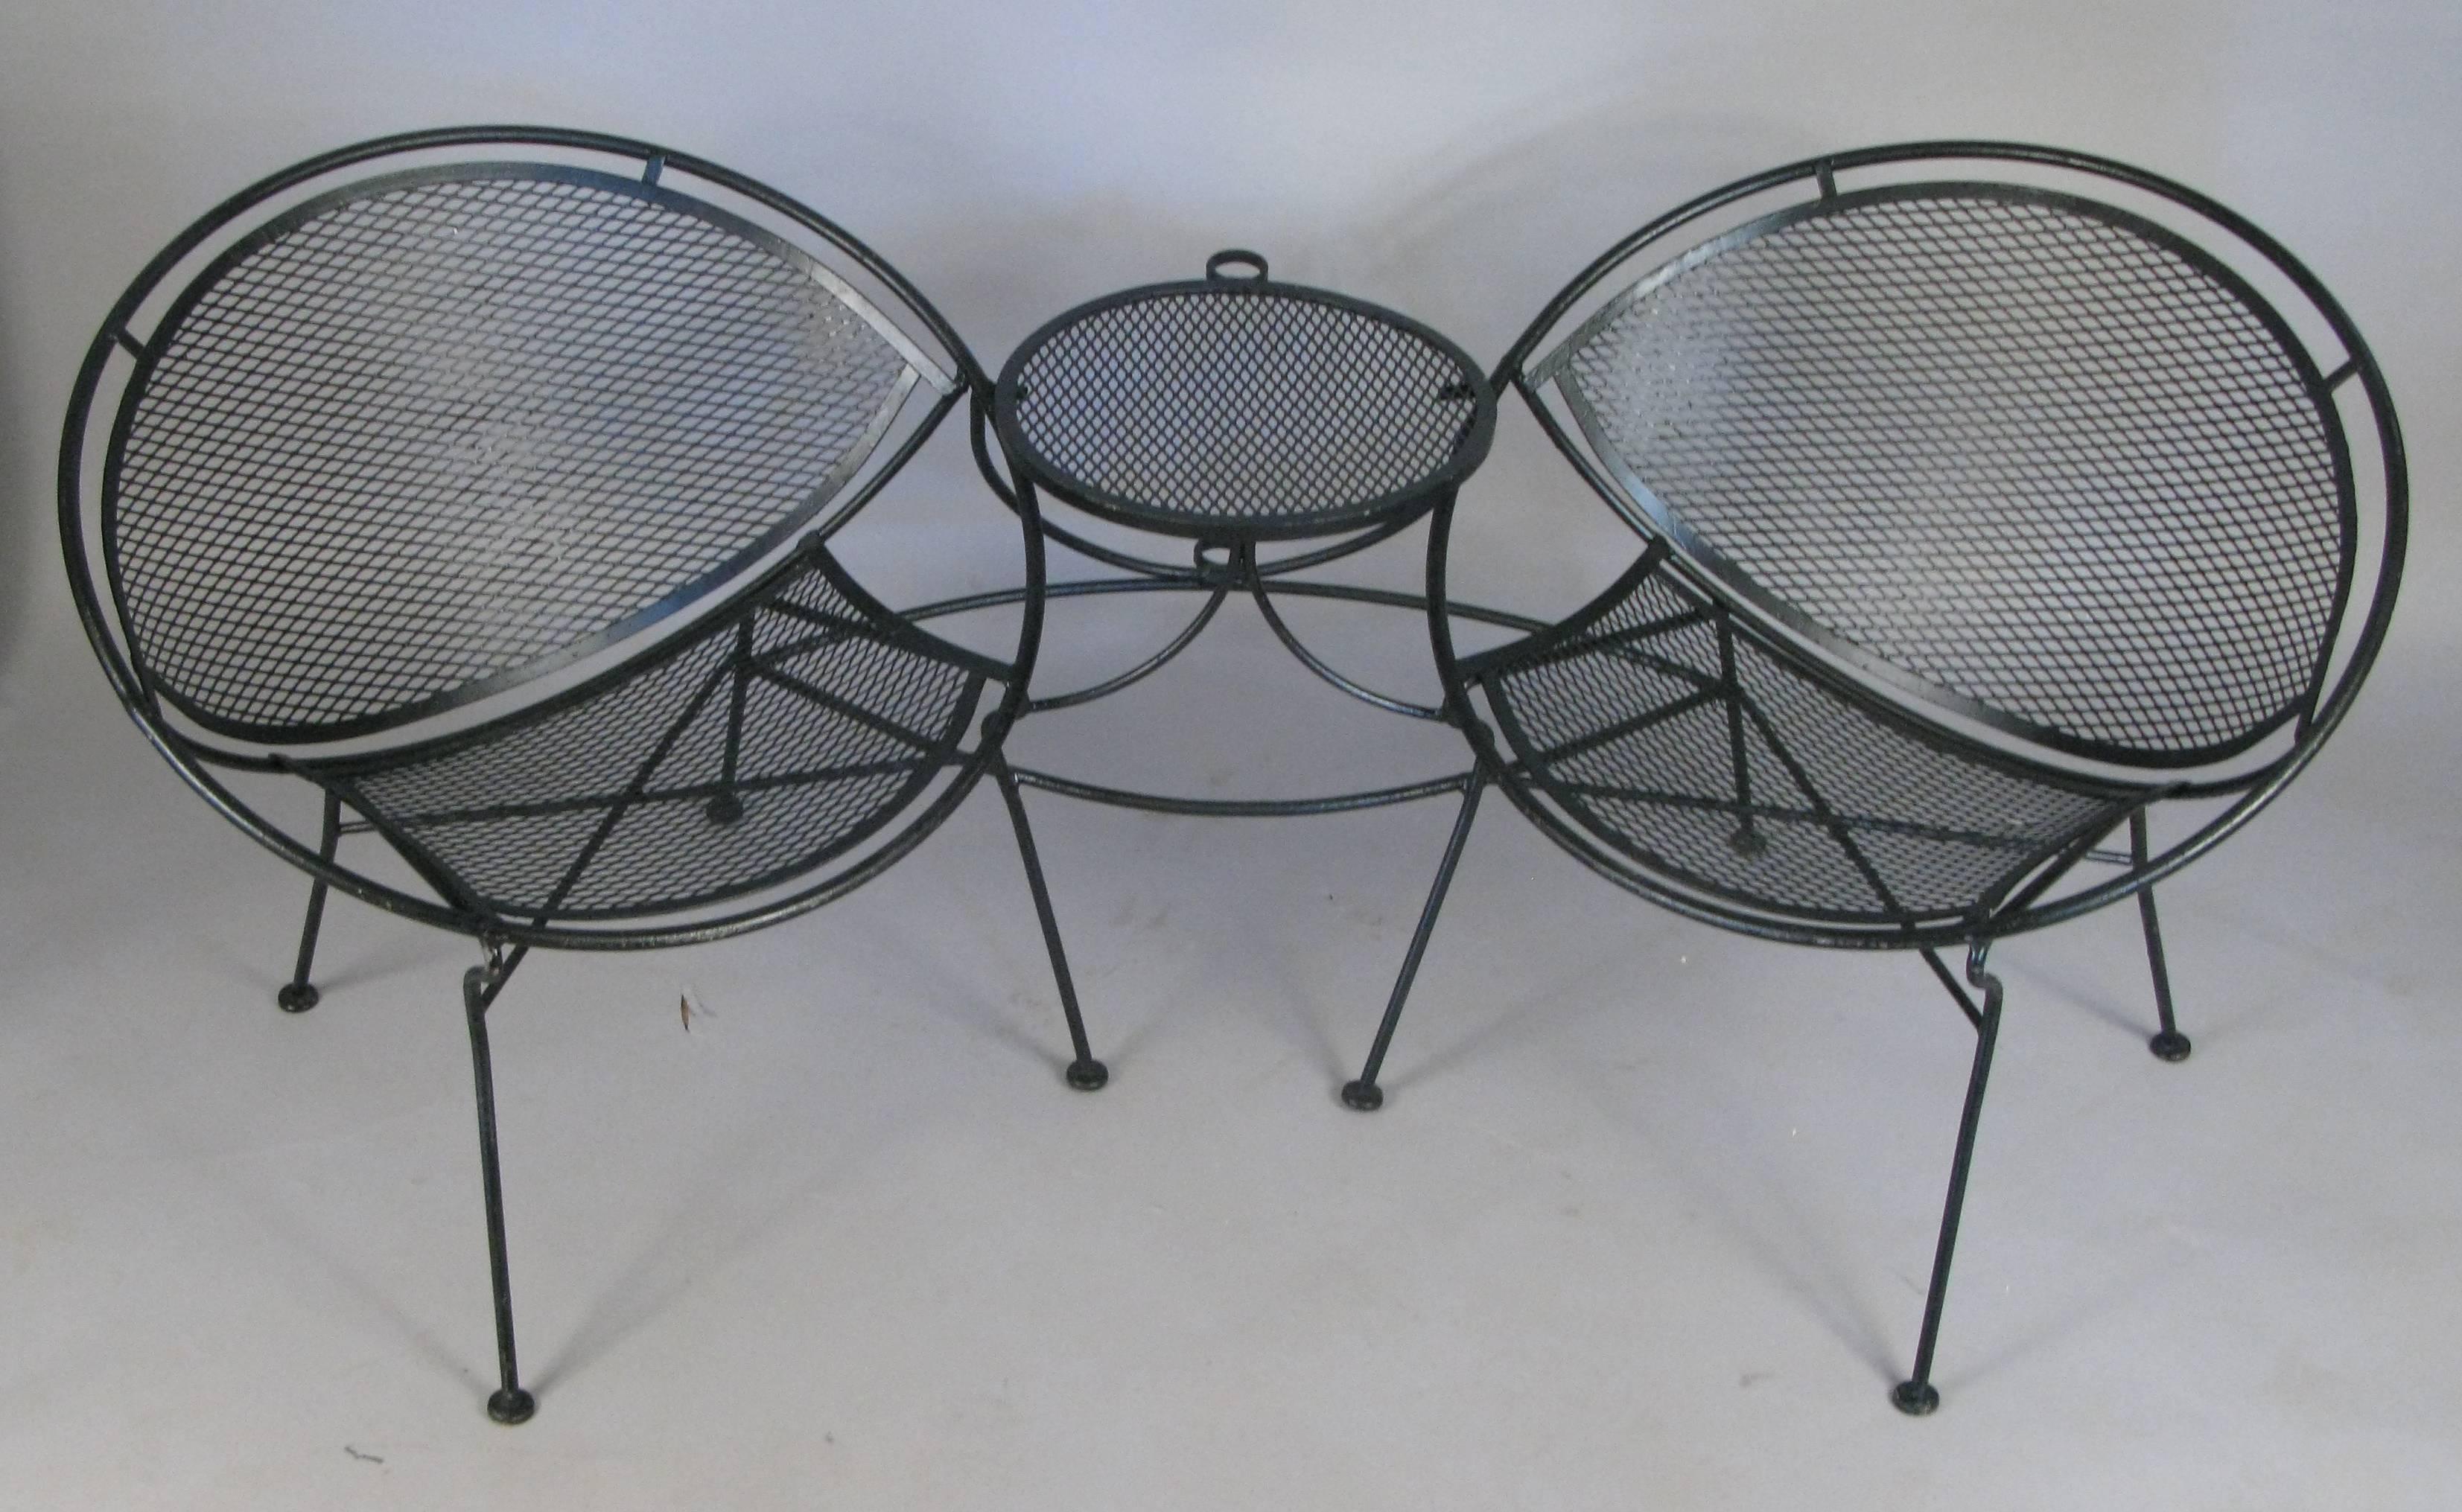 A 1950s wrought iron 'tête-à-tête' from Salterini's Radar collection, designed by Maurizio Tempestini. Very comfortable and stylish, the two lounge chairs are connected by a table between, which also incorporates an umbrella holder. The chairs are